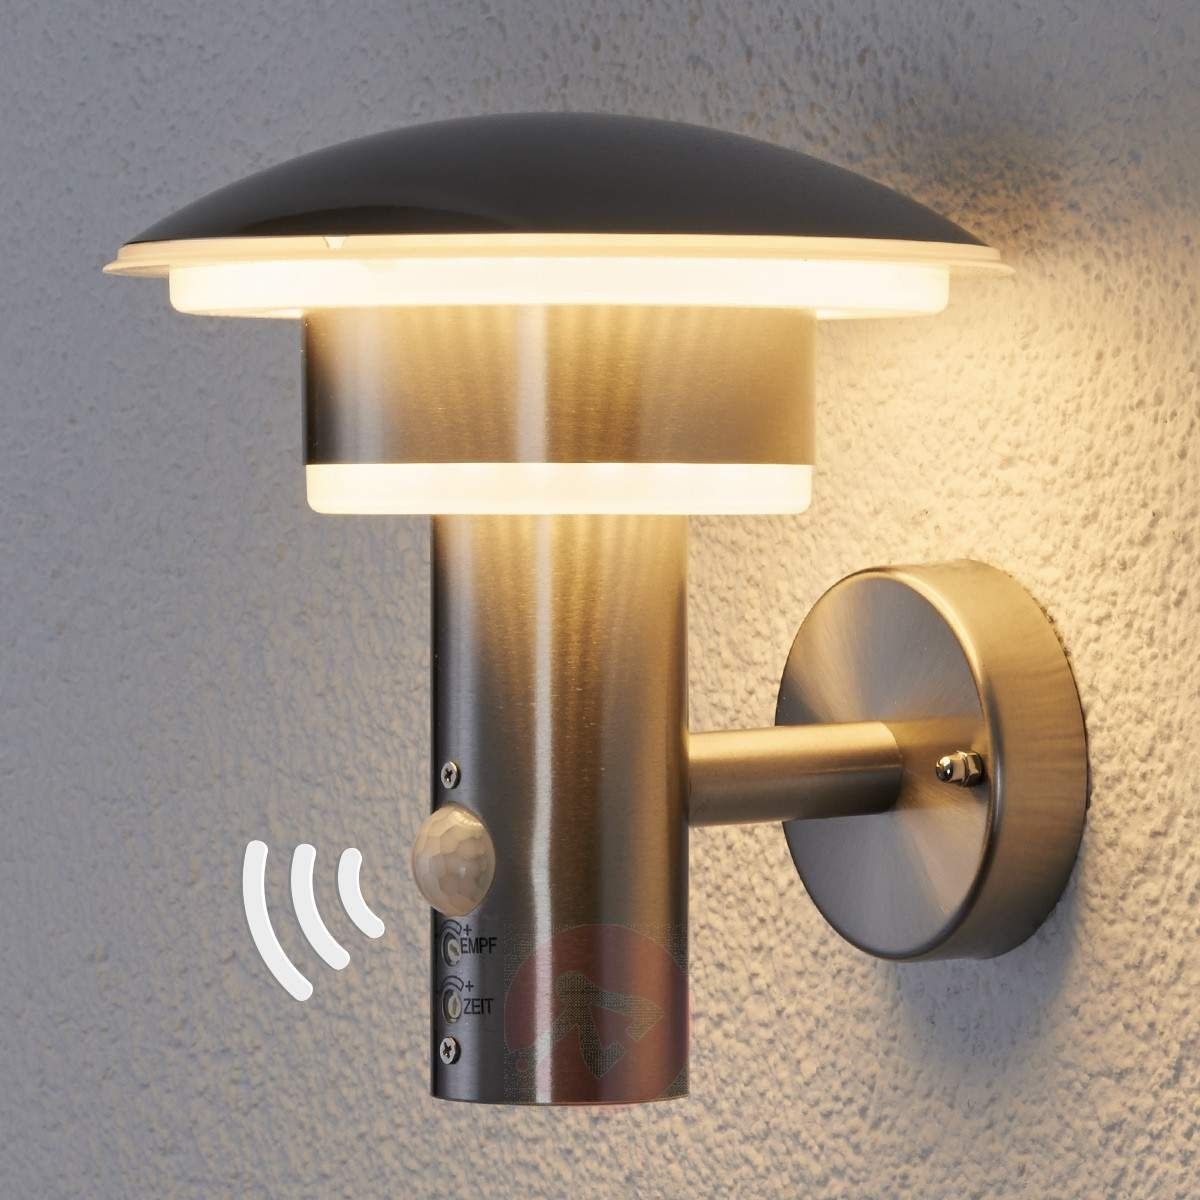 Pir Outdoor Wall Light Lillie With Leds | Lights (View 11 of 15)